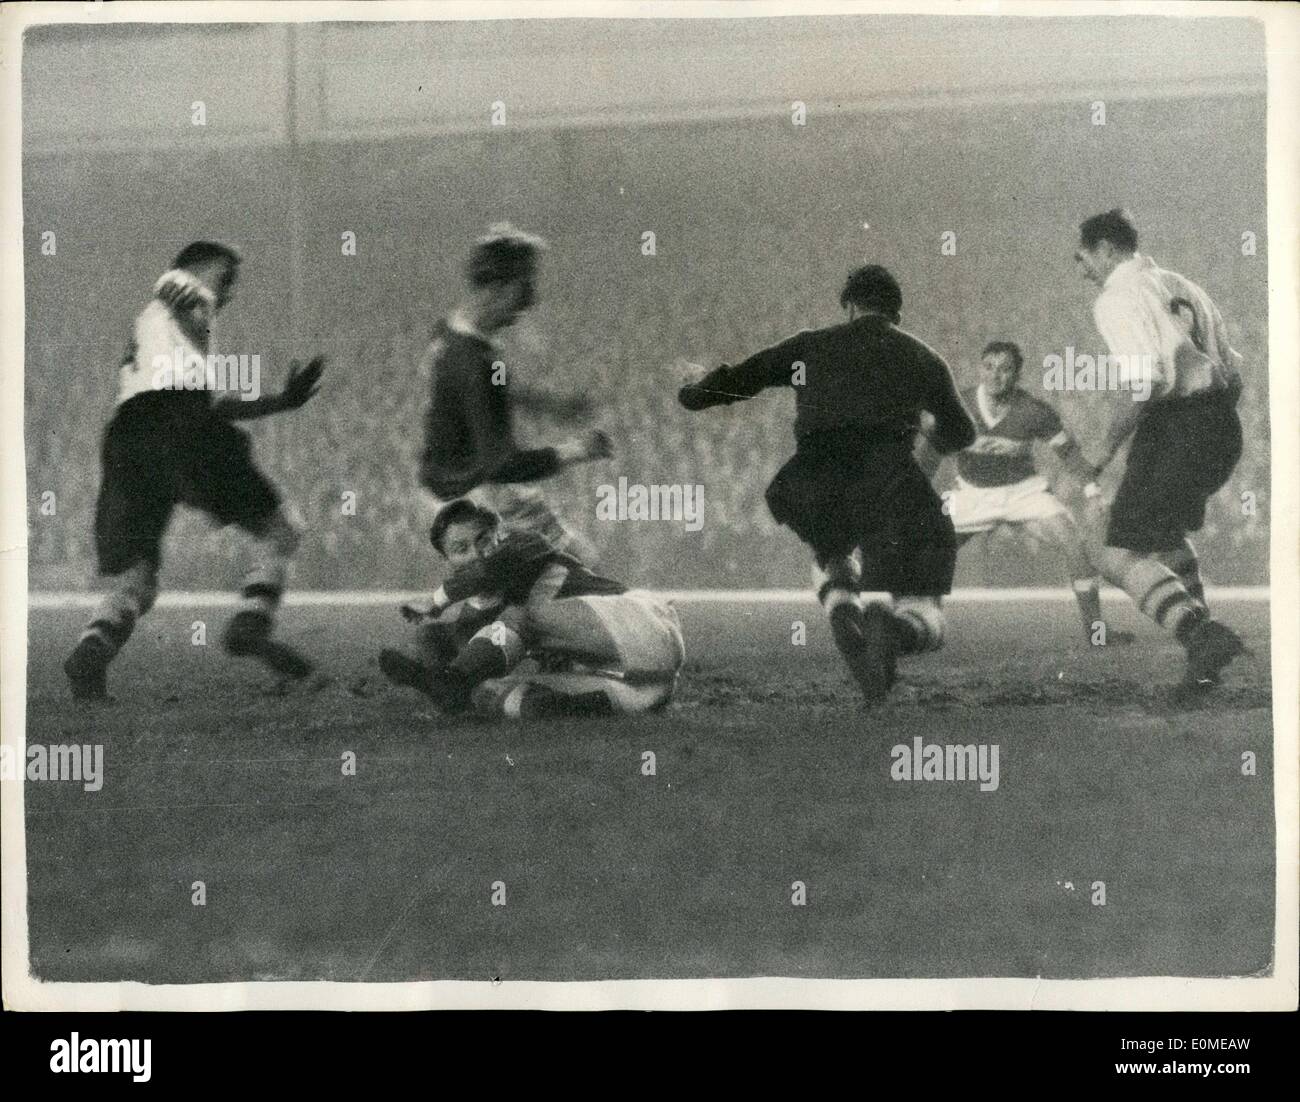 Nov. 11, 1954 - Floodlit football at Highbury. Arsenal v Spartak.: Arsenal this evening played Moscow Spartak in a floodlit match as Highbury. Spartak won 2-1. Photo shows Kelsey, the Arsenal goalie seen saving from an attack by Netto, the Spartak left-half and Paramonov the Spartak inside right. Stock Photo